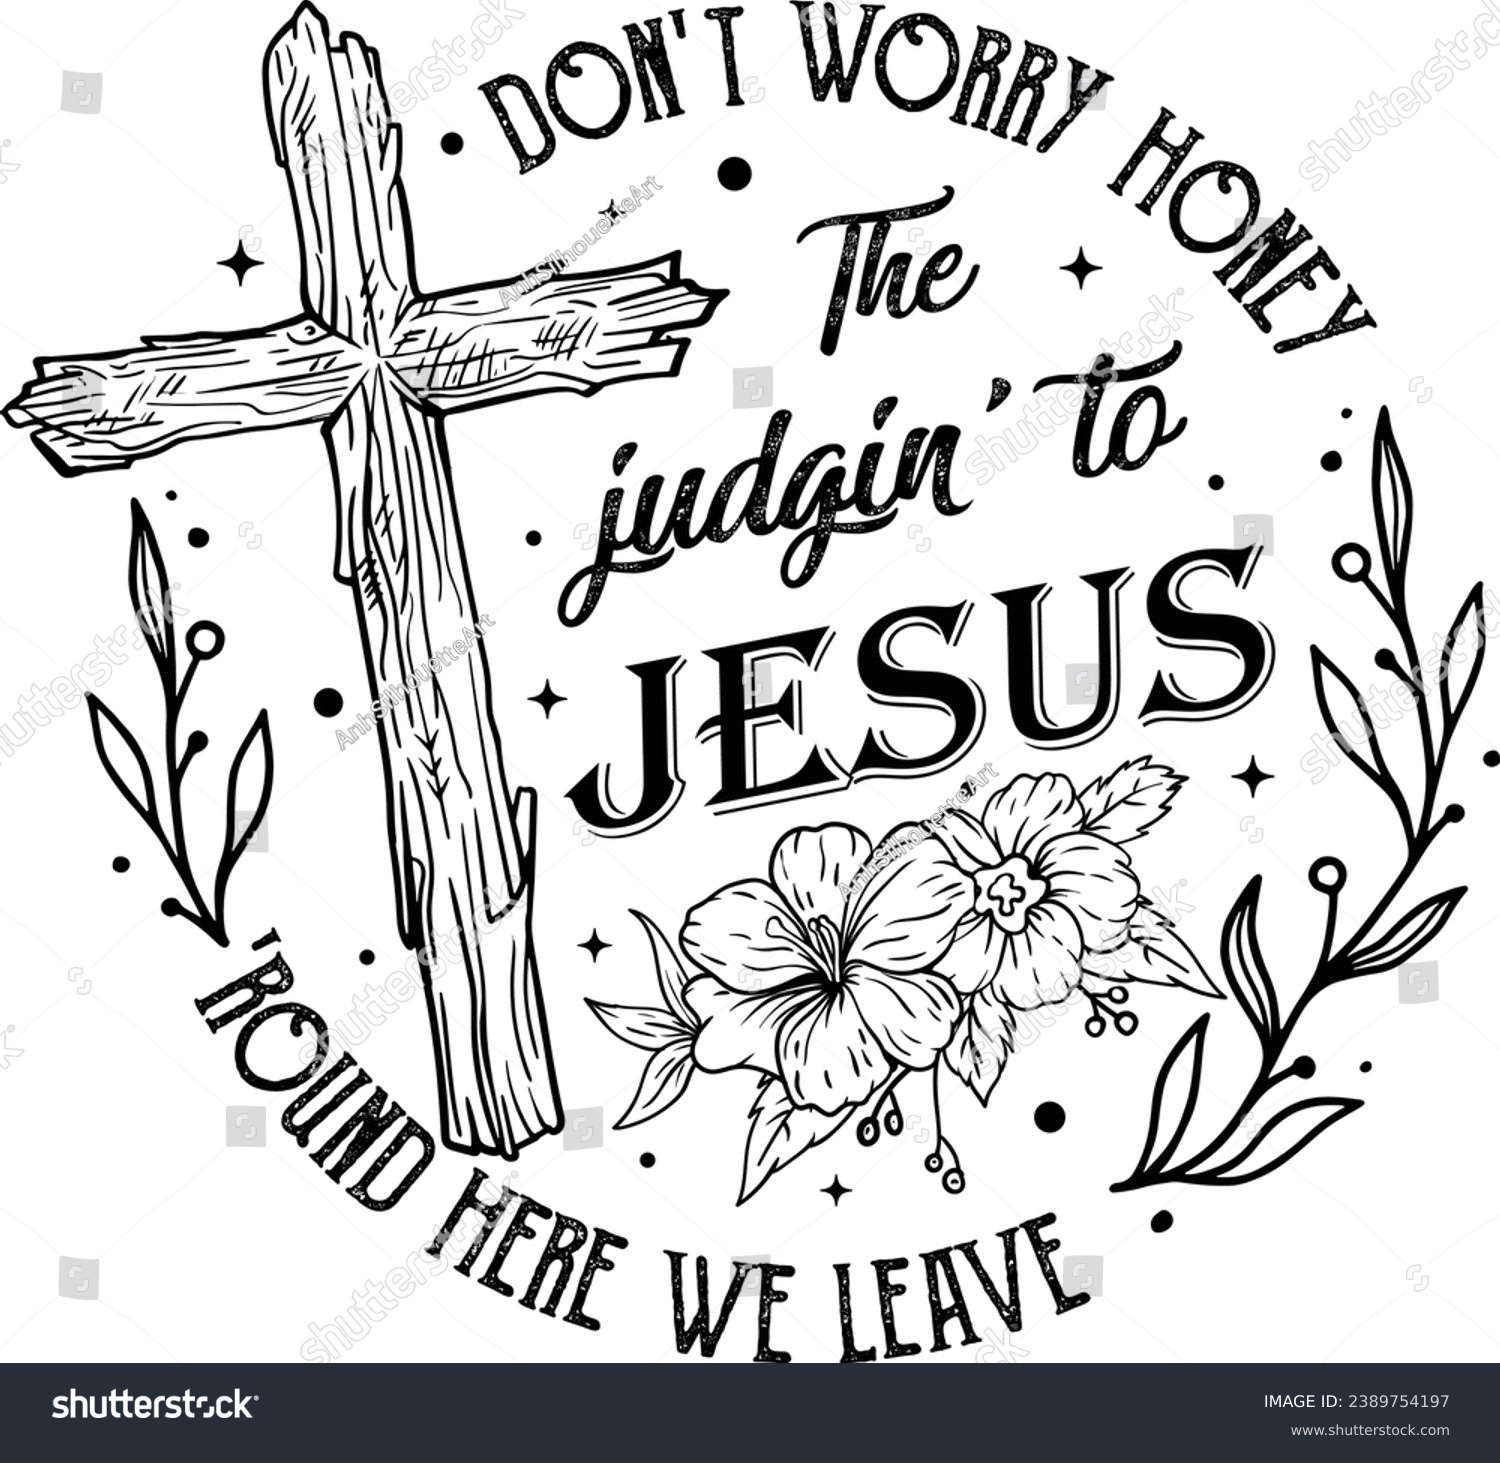 SVG of Don't Worry Honey Round Here We Leave the Judgin' to Jesus, Christian Country Western Rodeo, Love Like Jesus, Cross Flowers, Faith, Bible Verse, Religious, Jesus svg